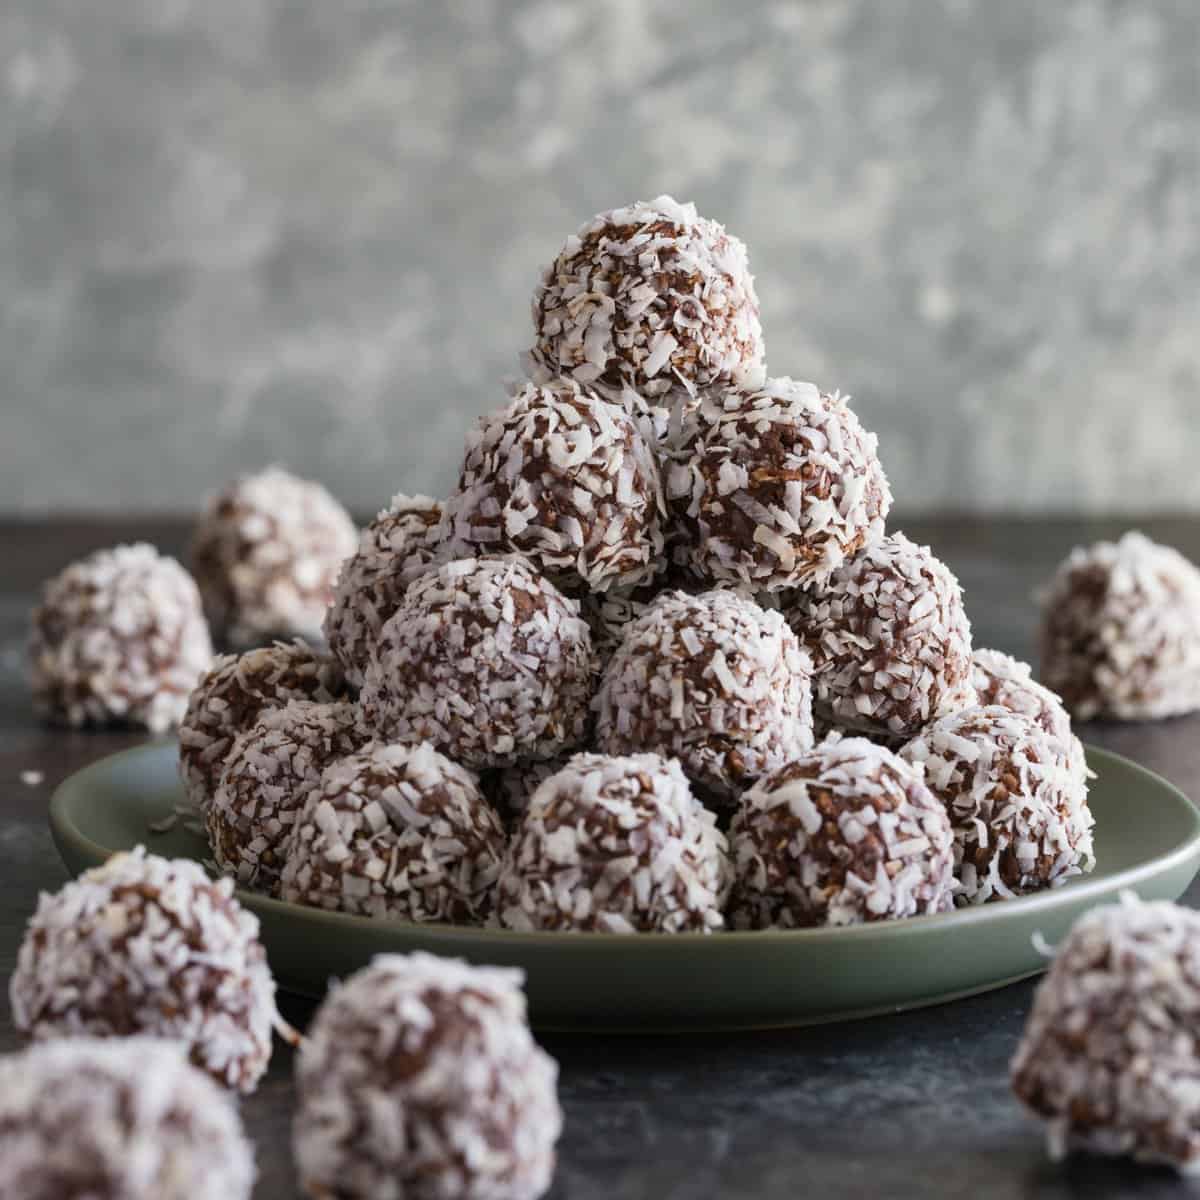 Chocolate Peanut Butter Oatmeal Balls with Coconut